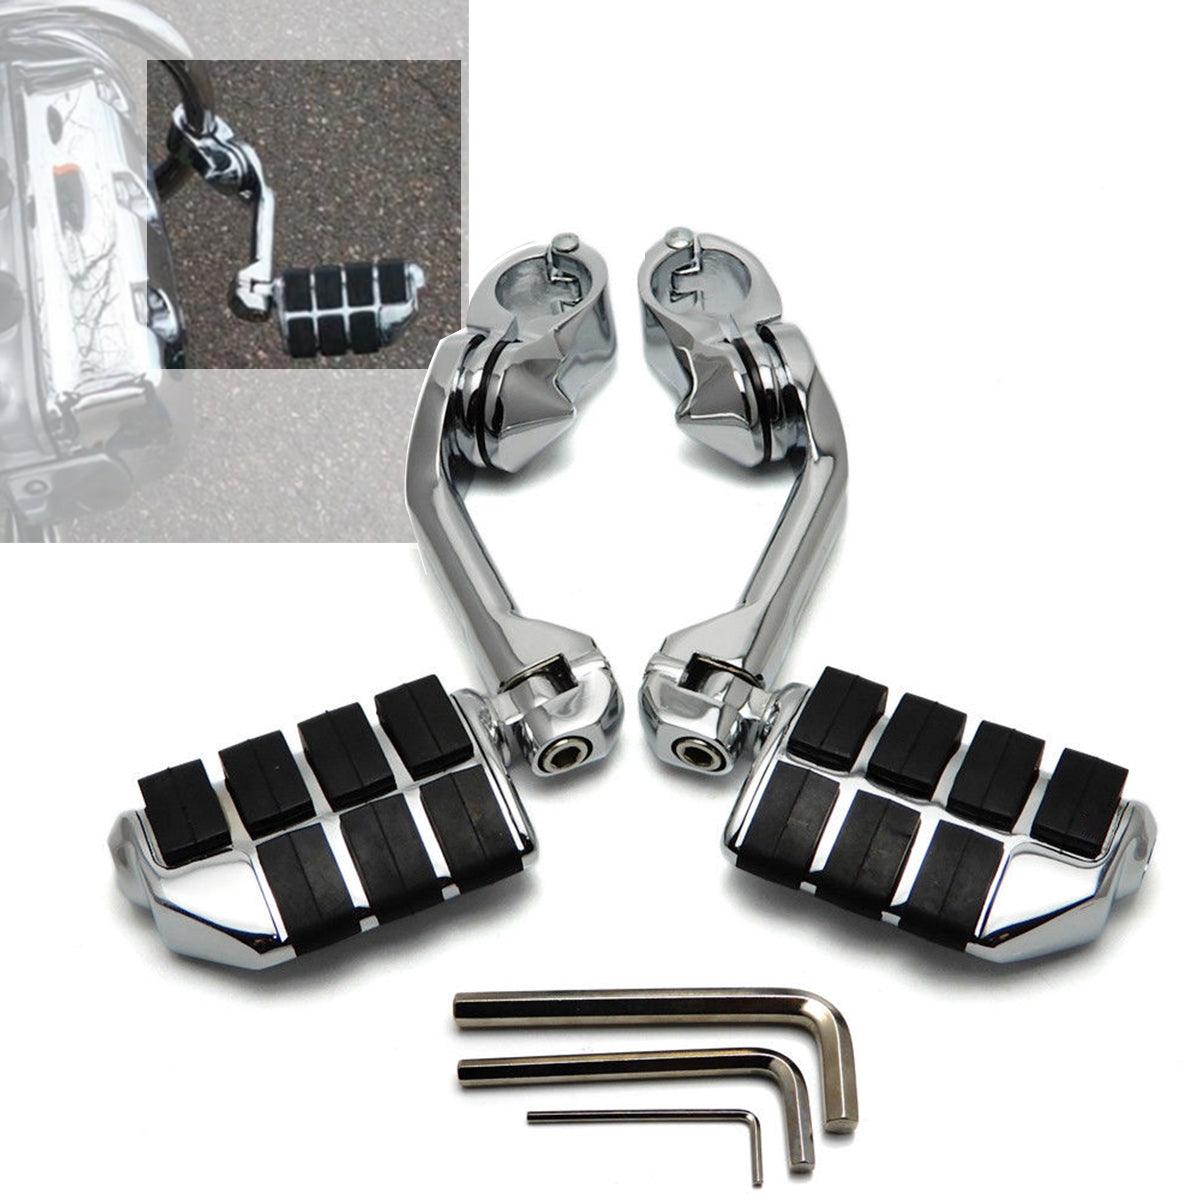 TCMT Long Highway Foot Pegs Fit For Harley 1-1/4